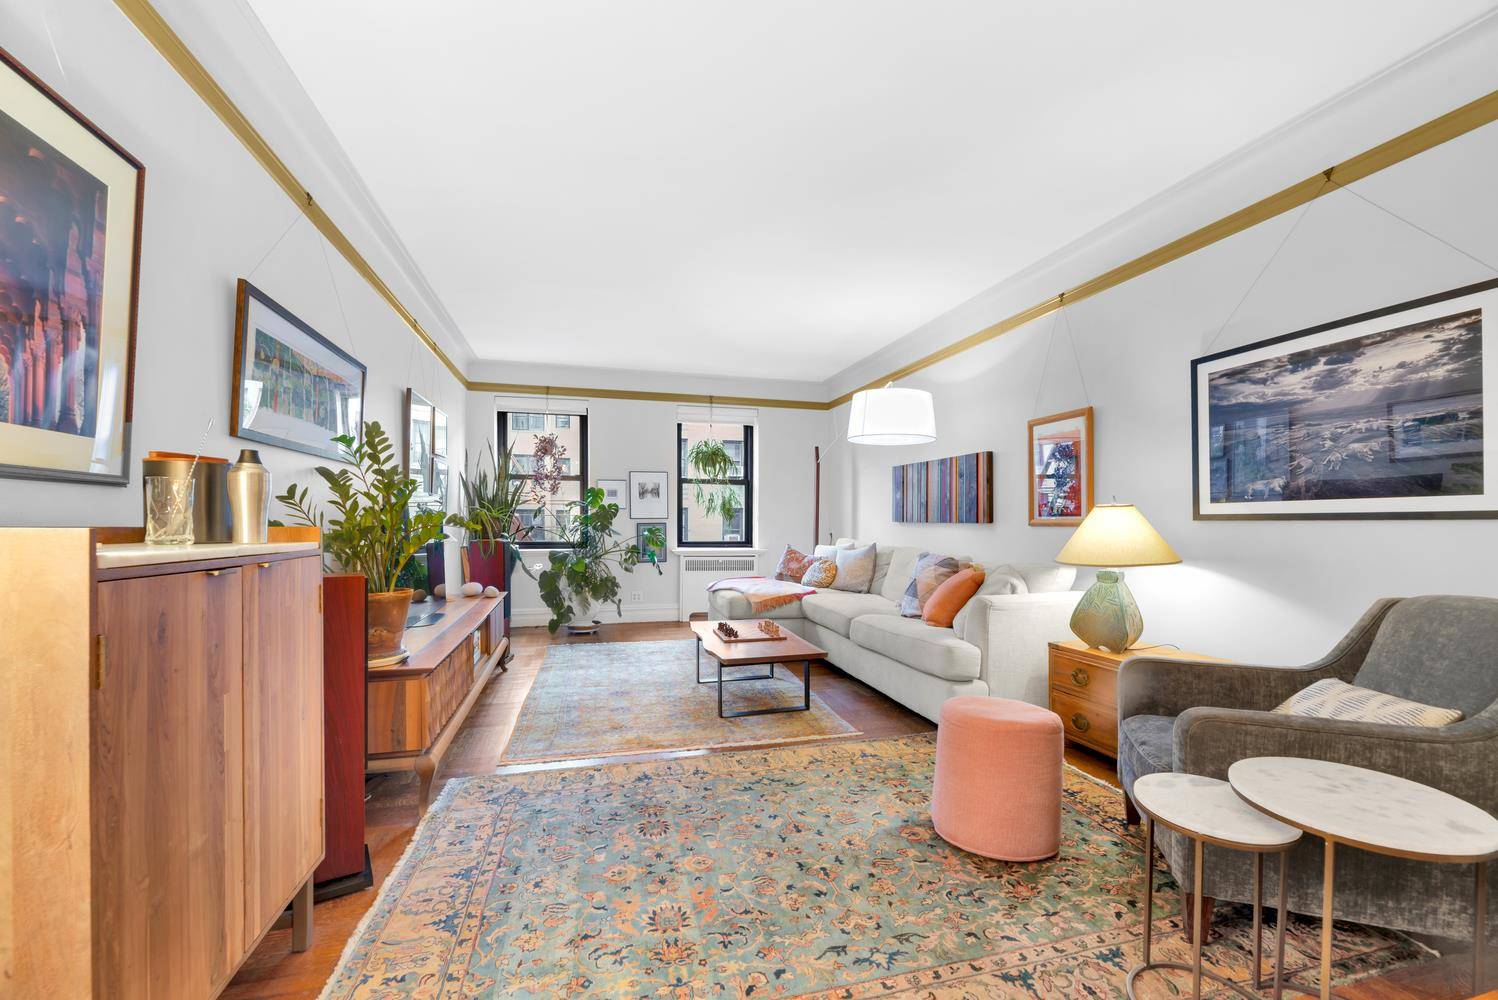 Welcome home. Space, light, and pre war details abound in this sprawling 2 bedroom, 2 bath residence in Hudson Heights.